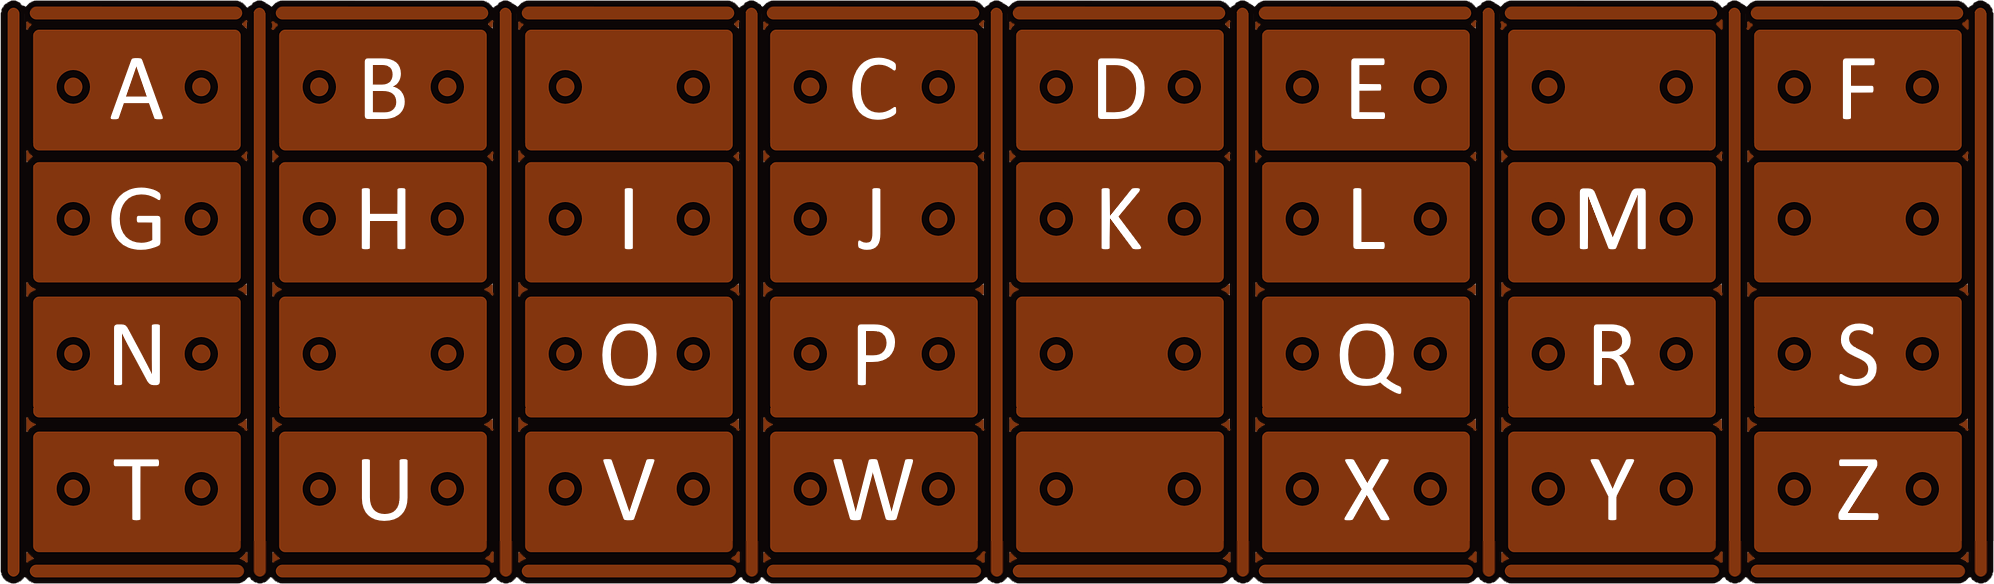 Four rows of drawers. Top row: AB_CDE_F, second row: GHIJKLM_, third row: N_OP_QRS, fourth row: TUVW_XYZ